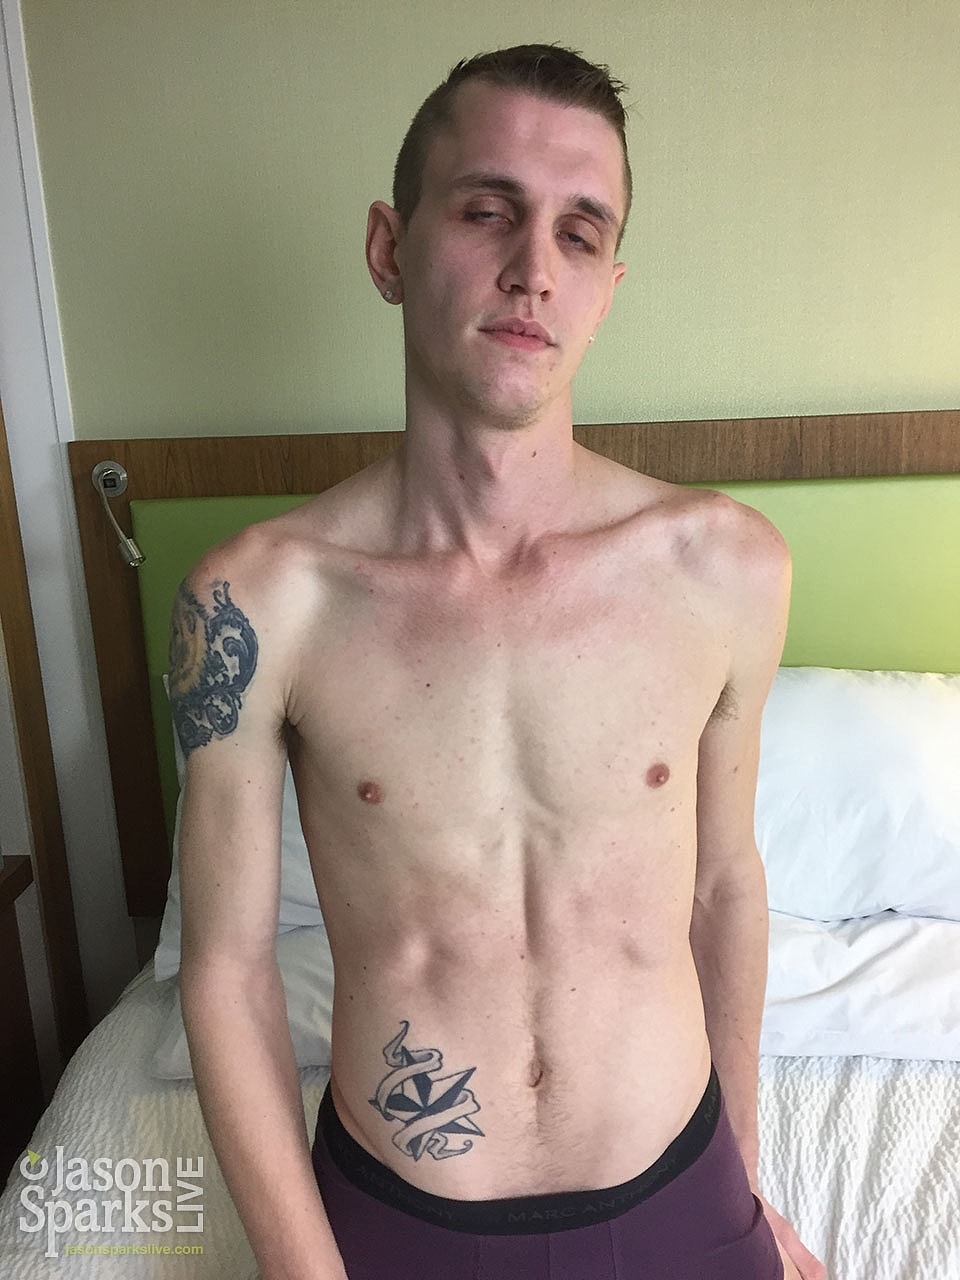 Skinny guy Damien Hyde poses naked before getting banged by gay Joshua James  